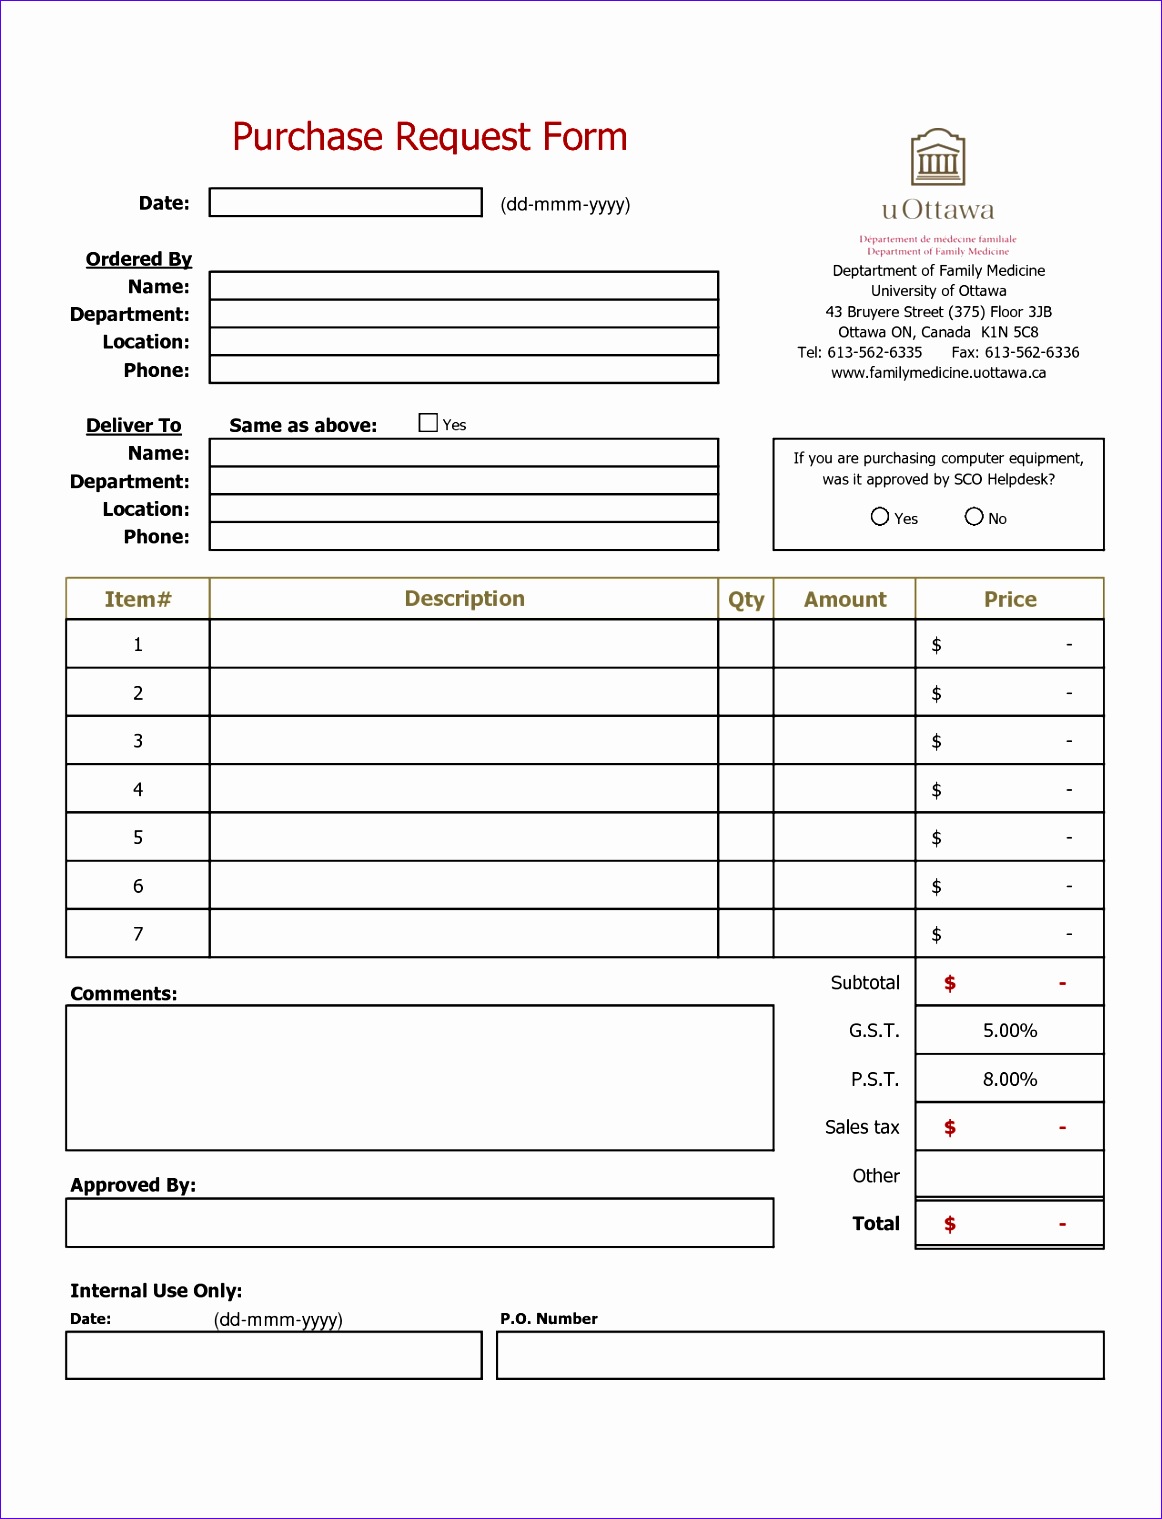 Purchase Order Request Form Excel ~ Excel Templates